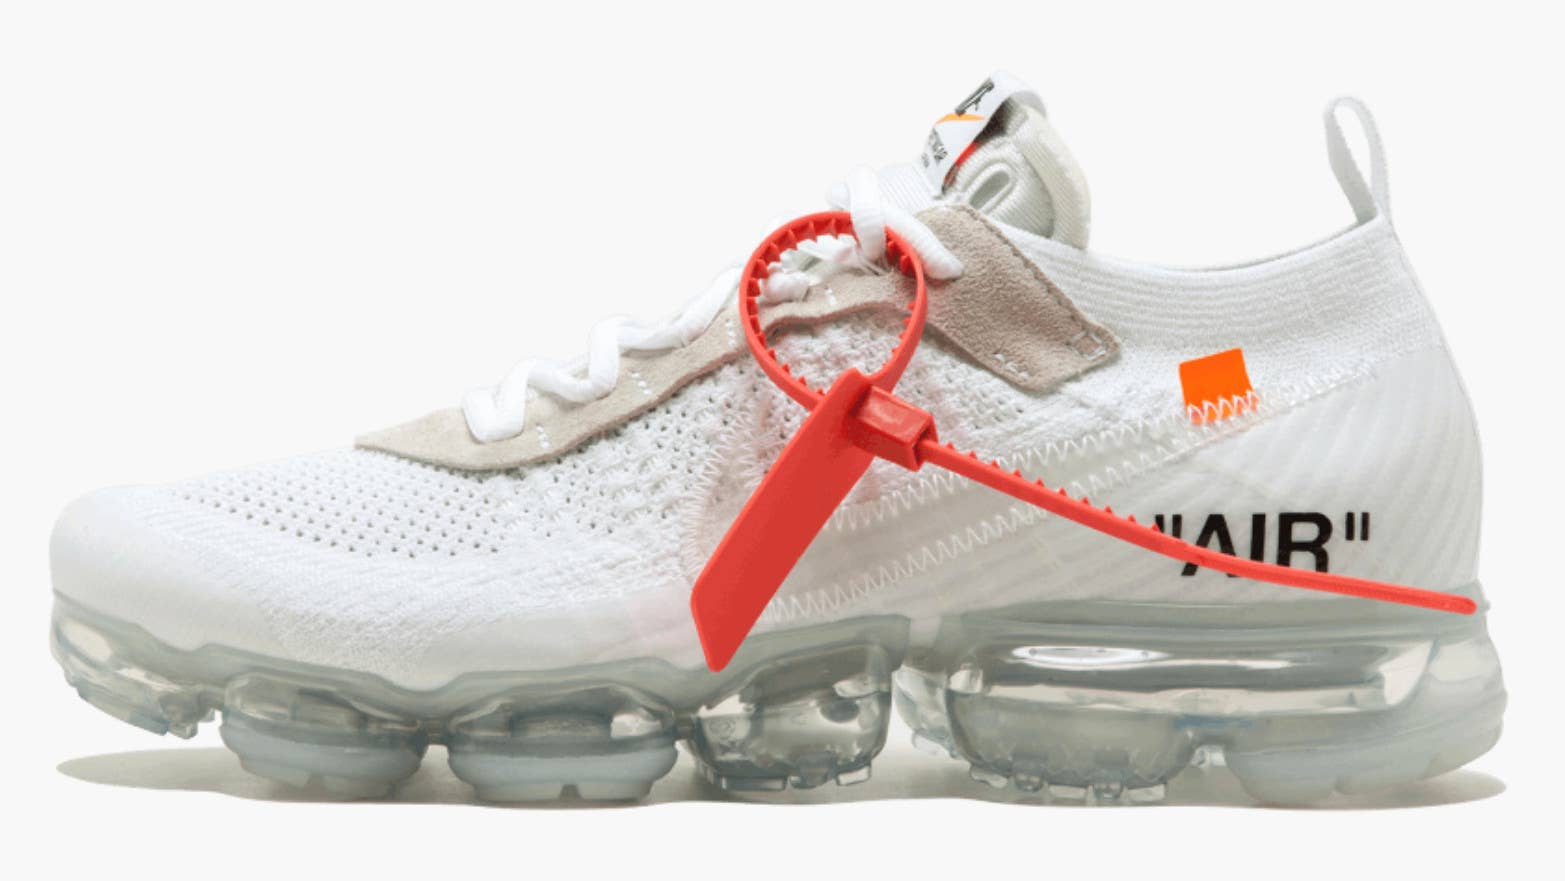 New Off-White x VaporMax Available on Nike Early Access